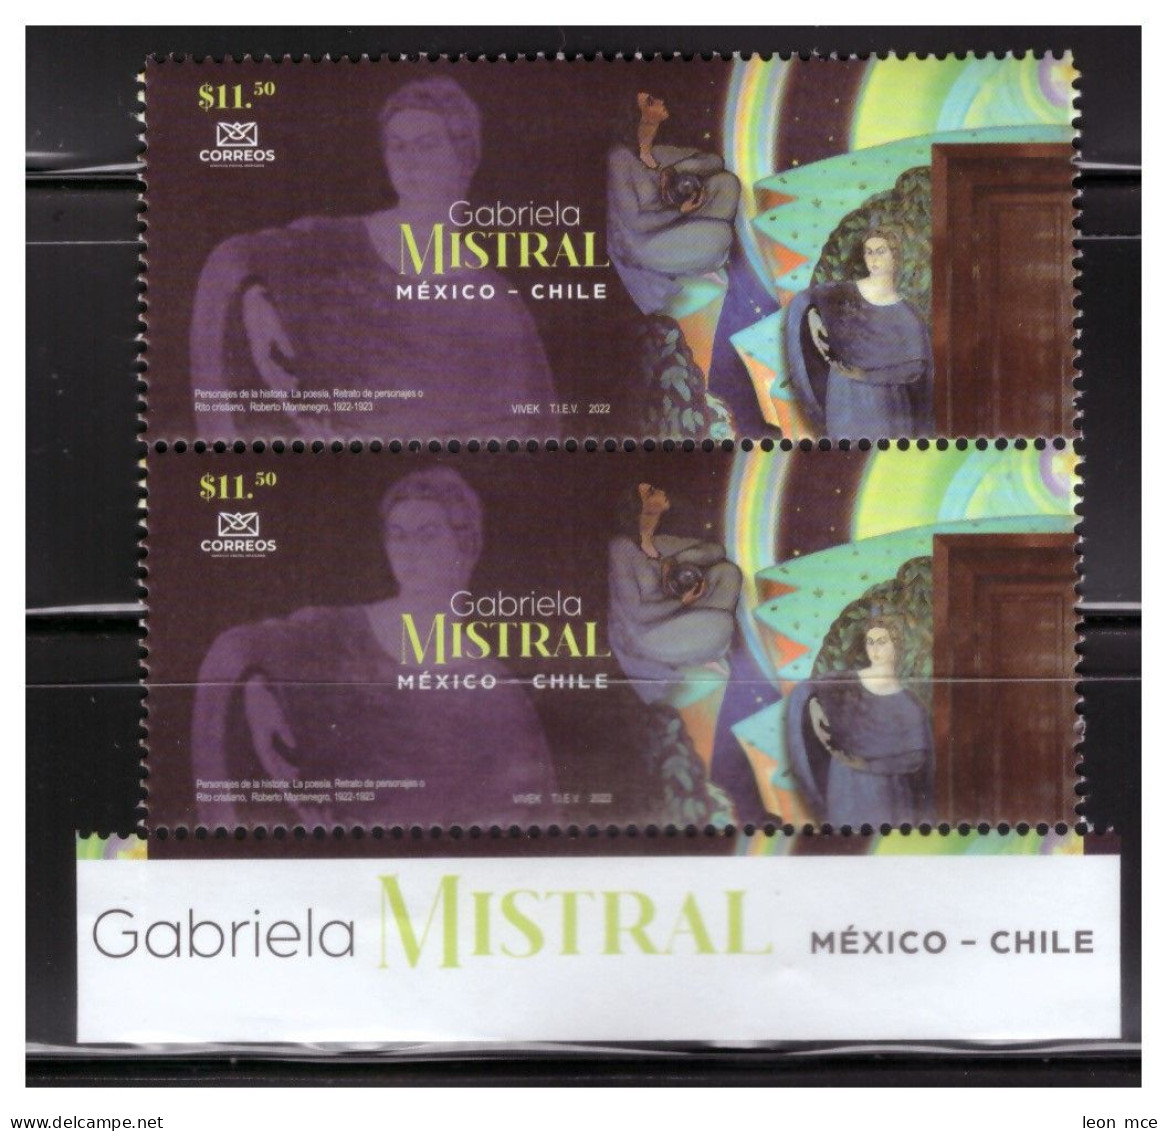 2022 MÉXICO - CHILE "Gabriela Mistral", EMISIÓN CONJUNTA, Writer, Joint Issue, 2 STAMPS WITH LEGEND MNH - Mexico